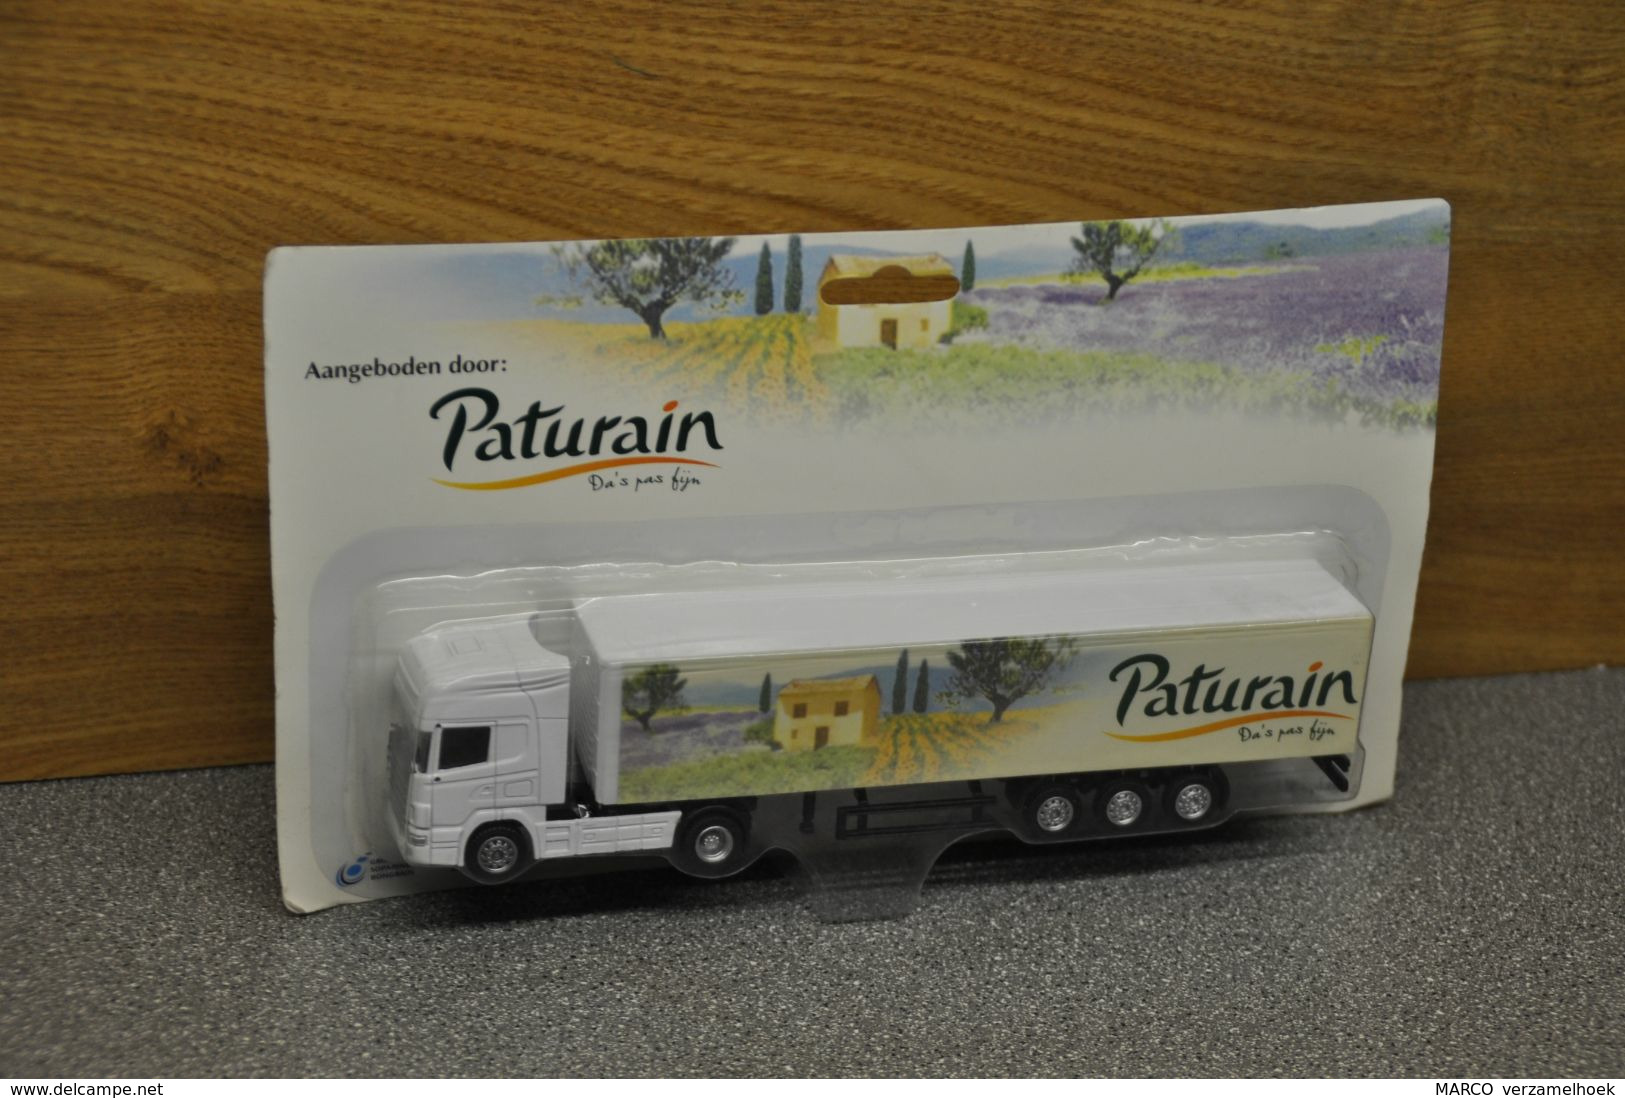 Paturain Holland Oto Weert Scale 1:87 Scania - Camions, Bus Et Construction